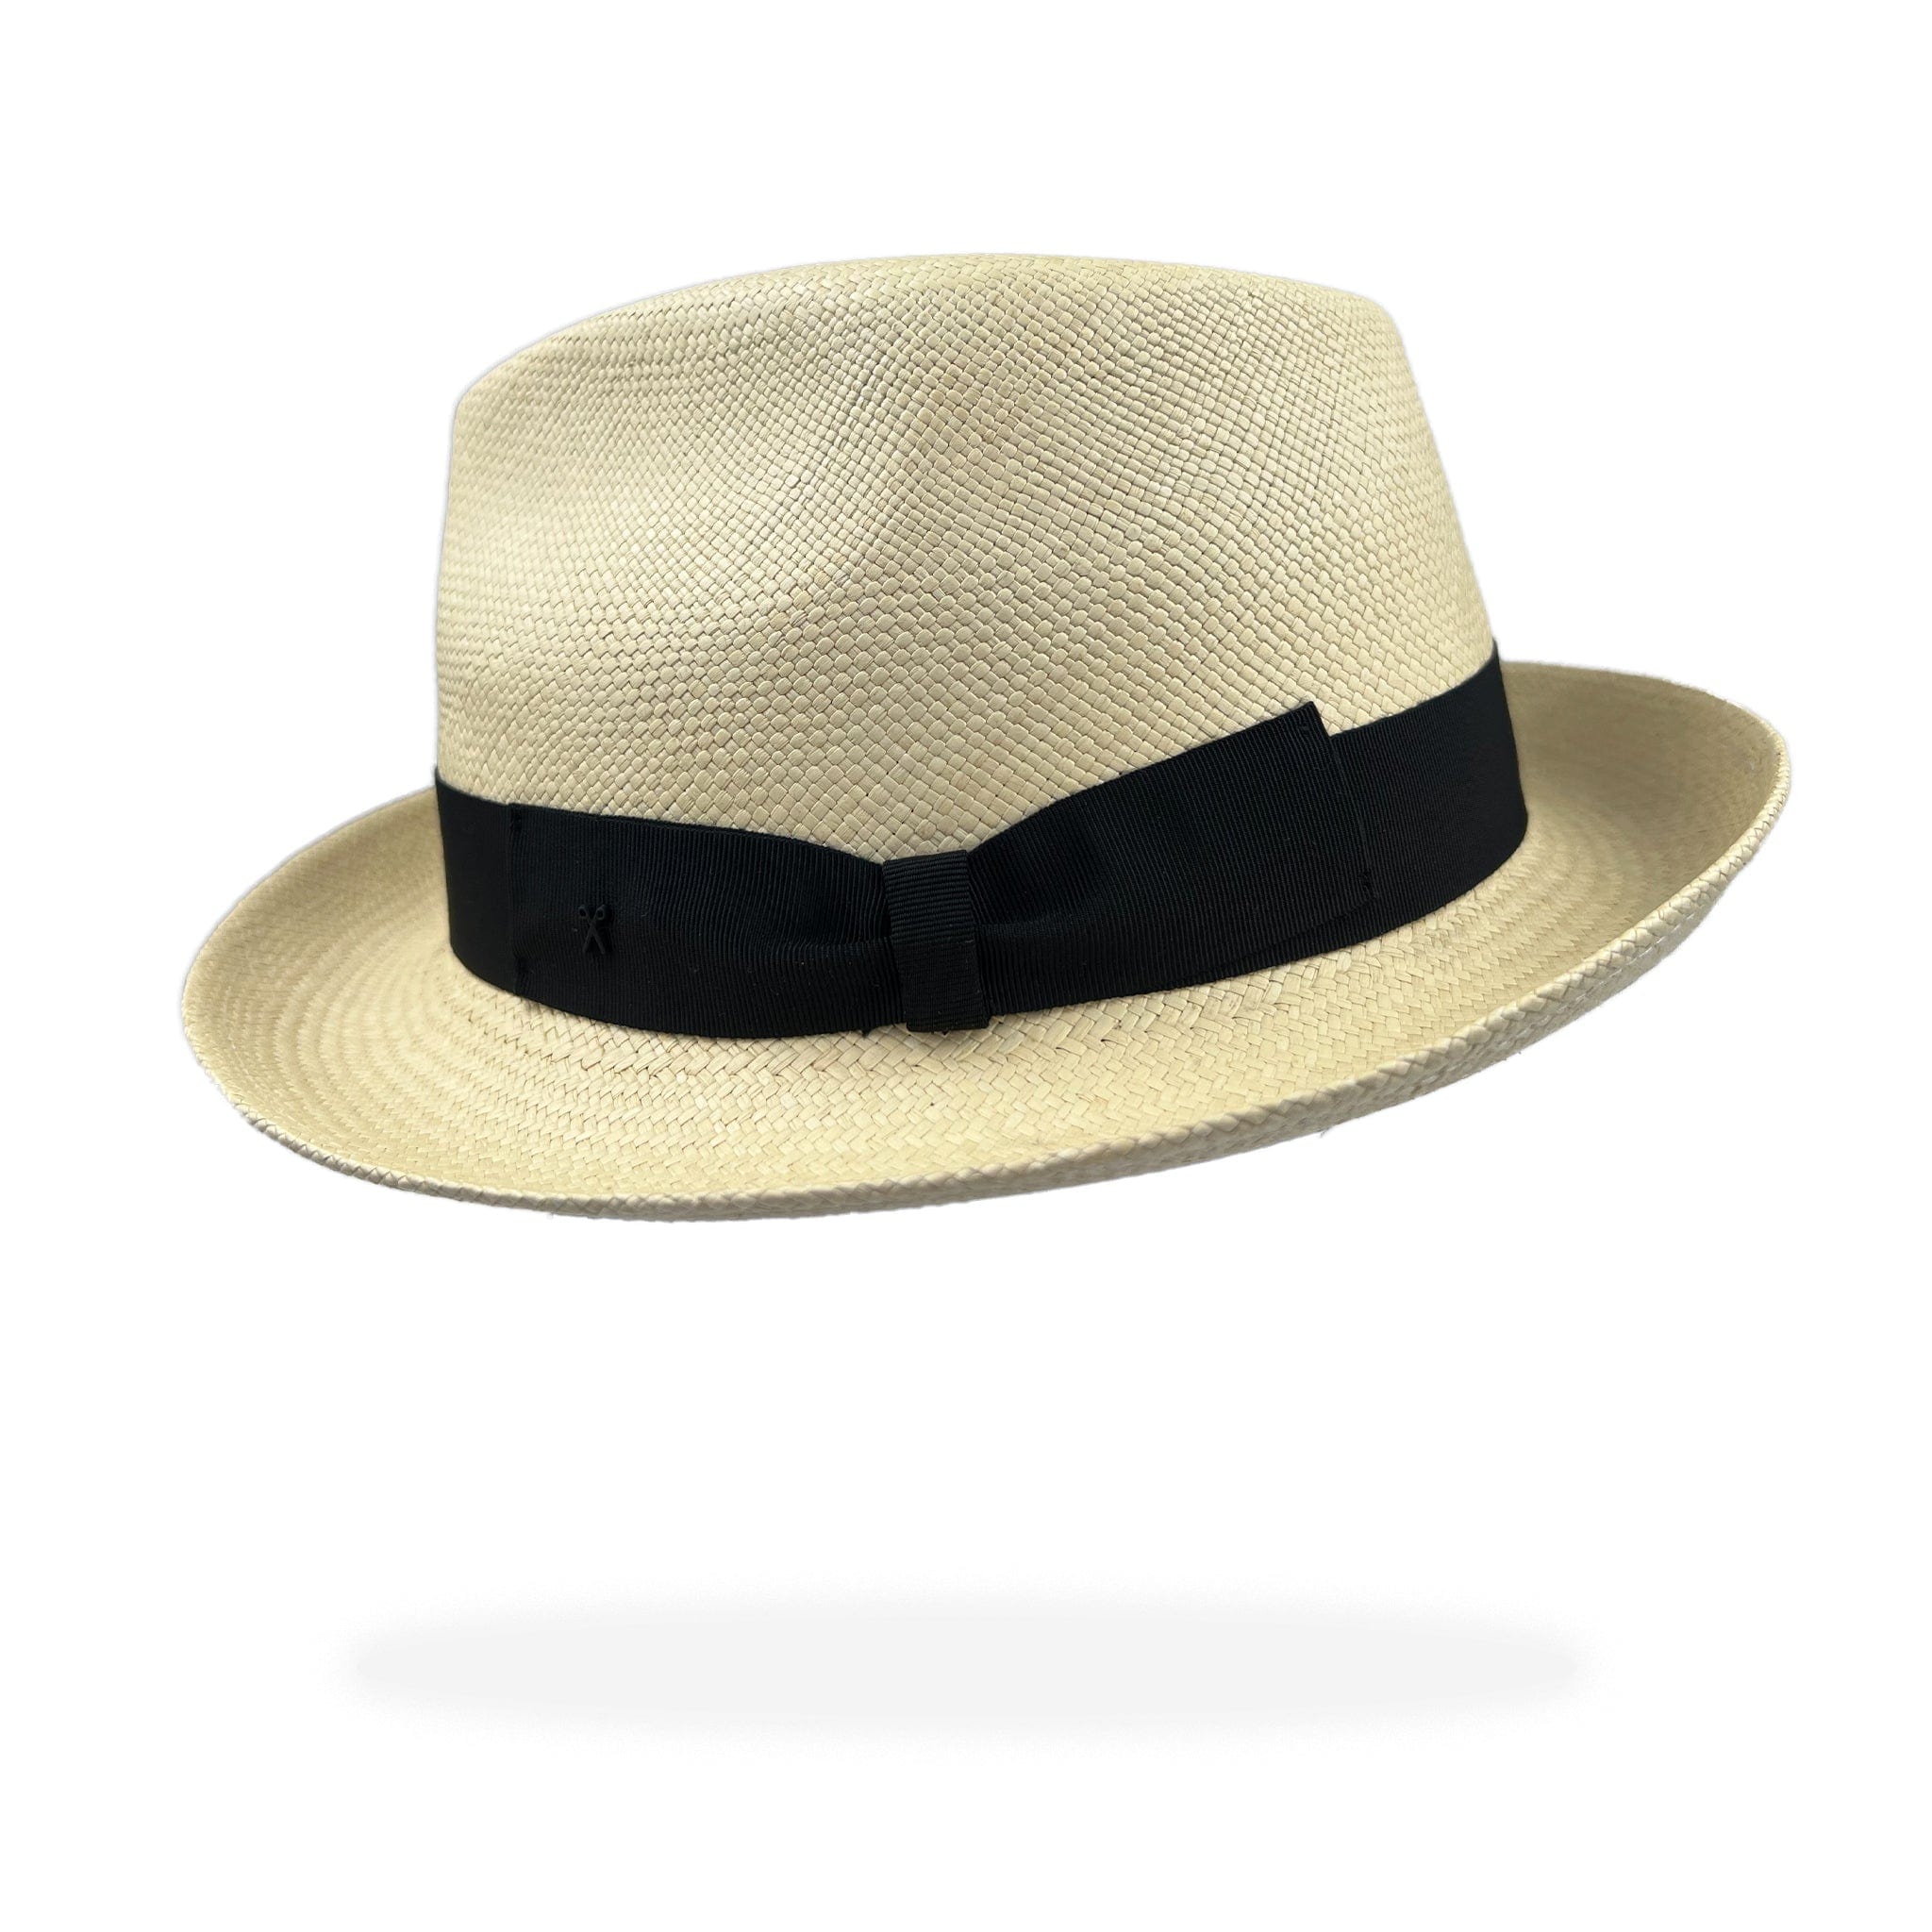 Unisex | Trilby Panama Hat | Natural Toquilla | Black Band | Made in Italy